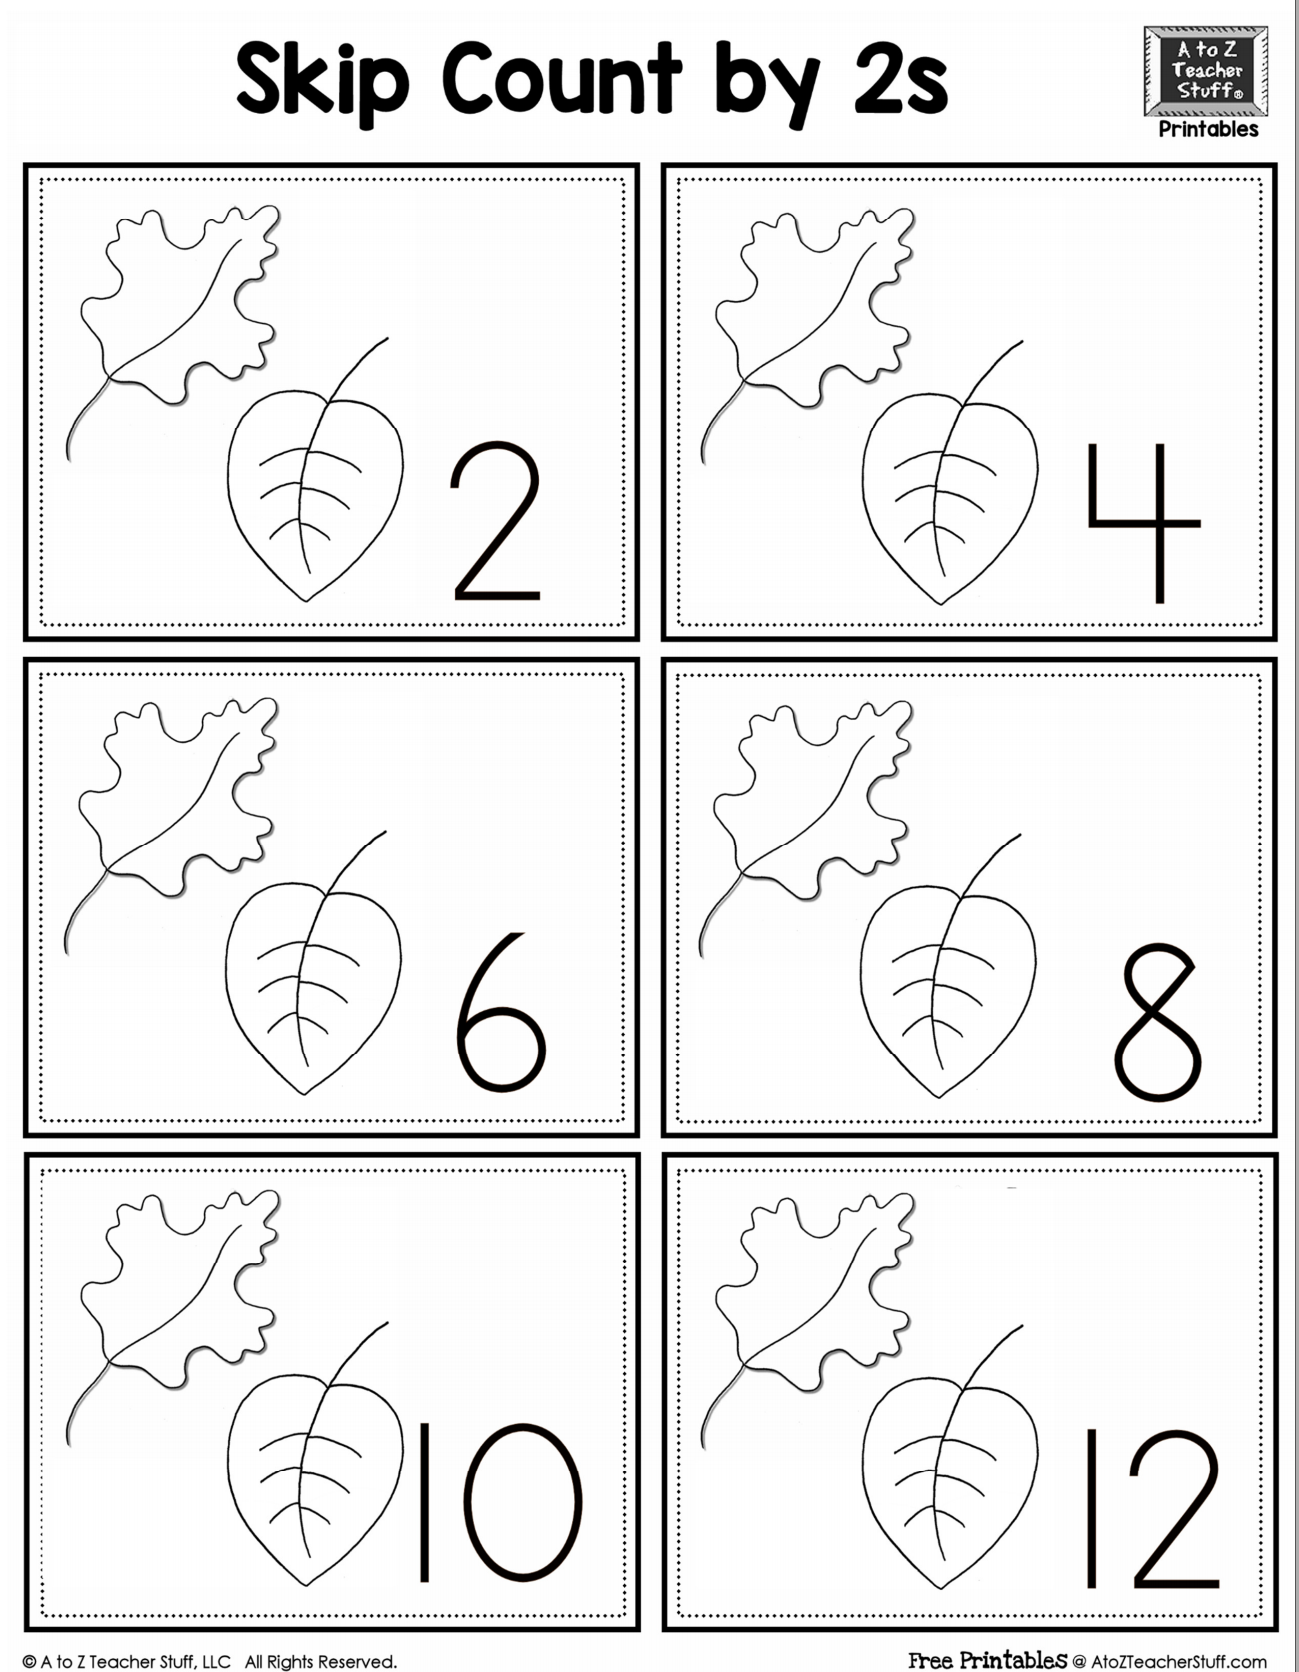 Skip Counting by 2s Printable